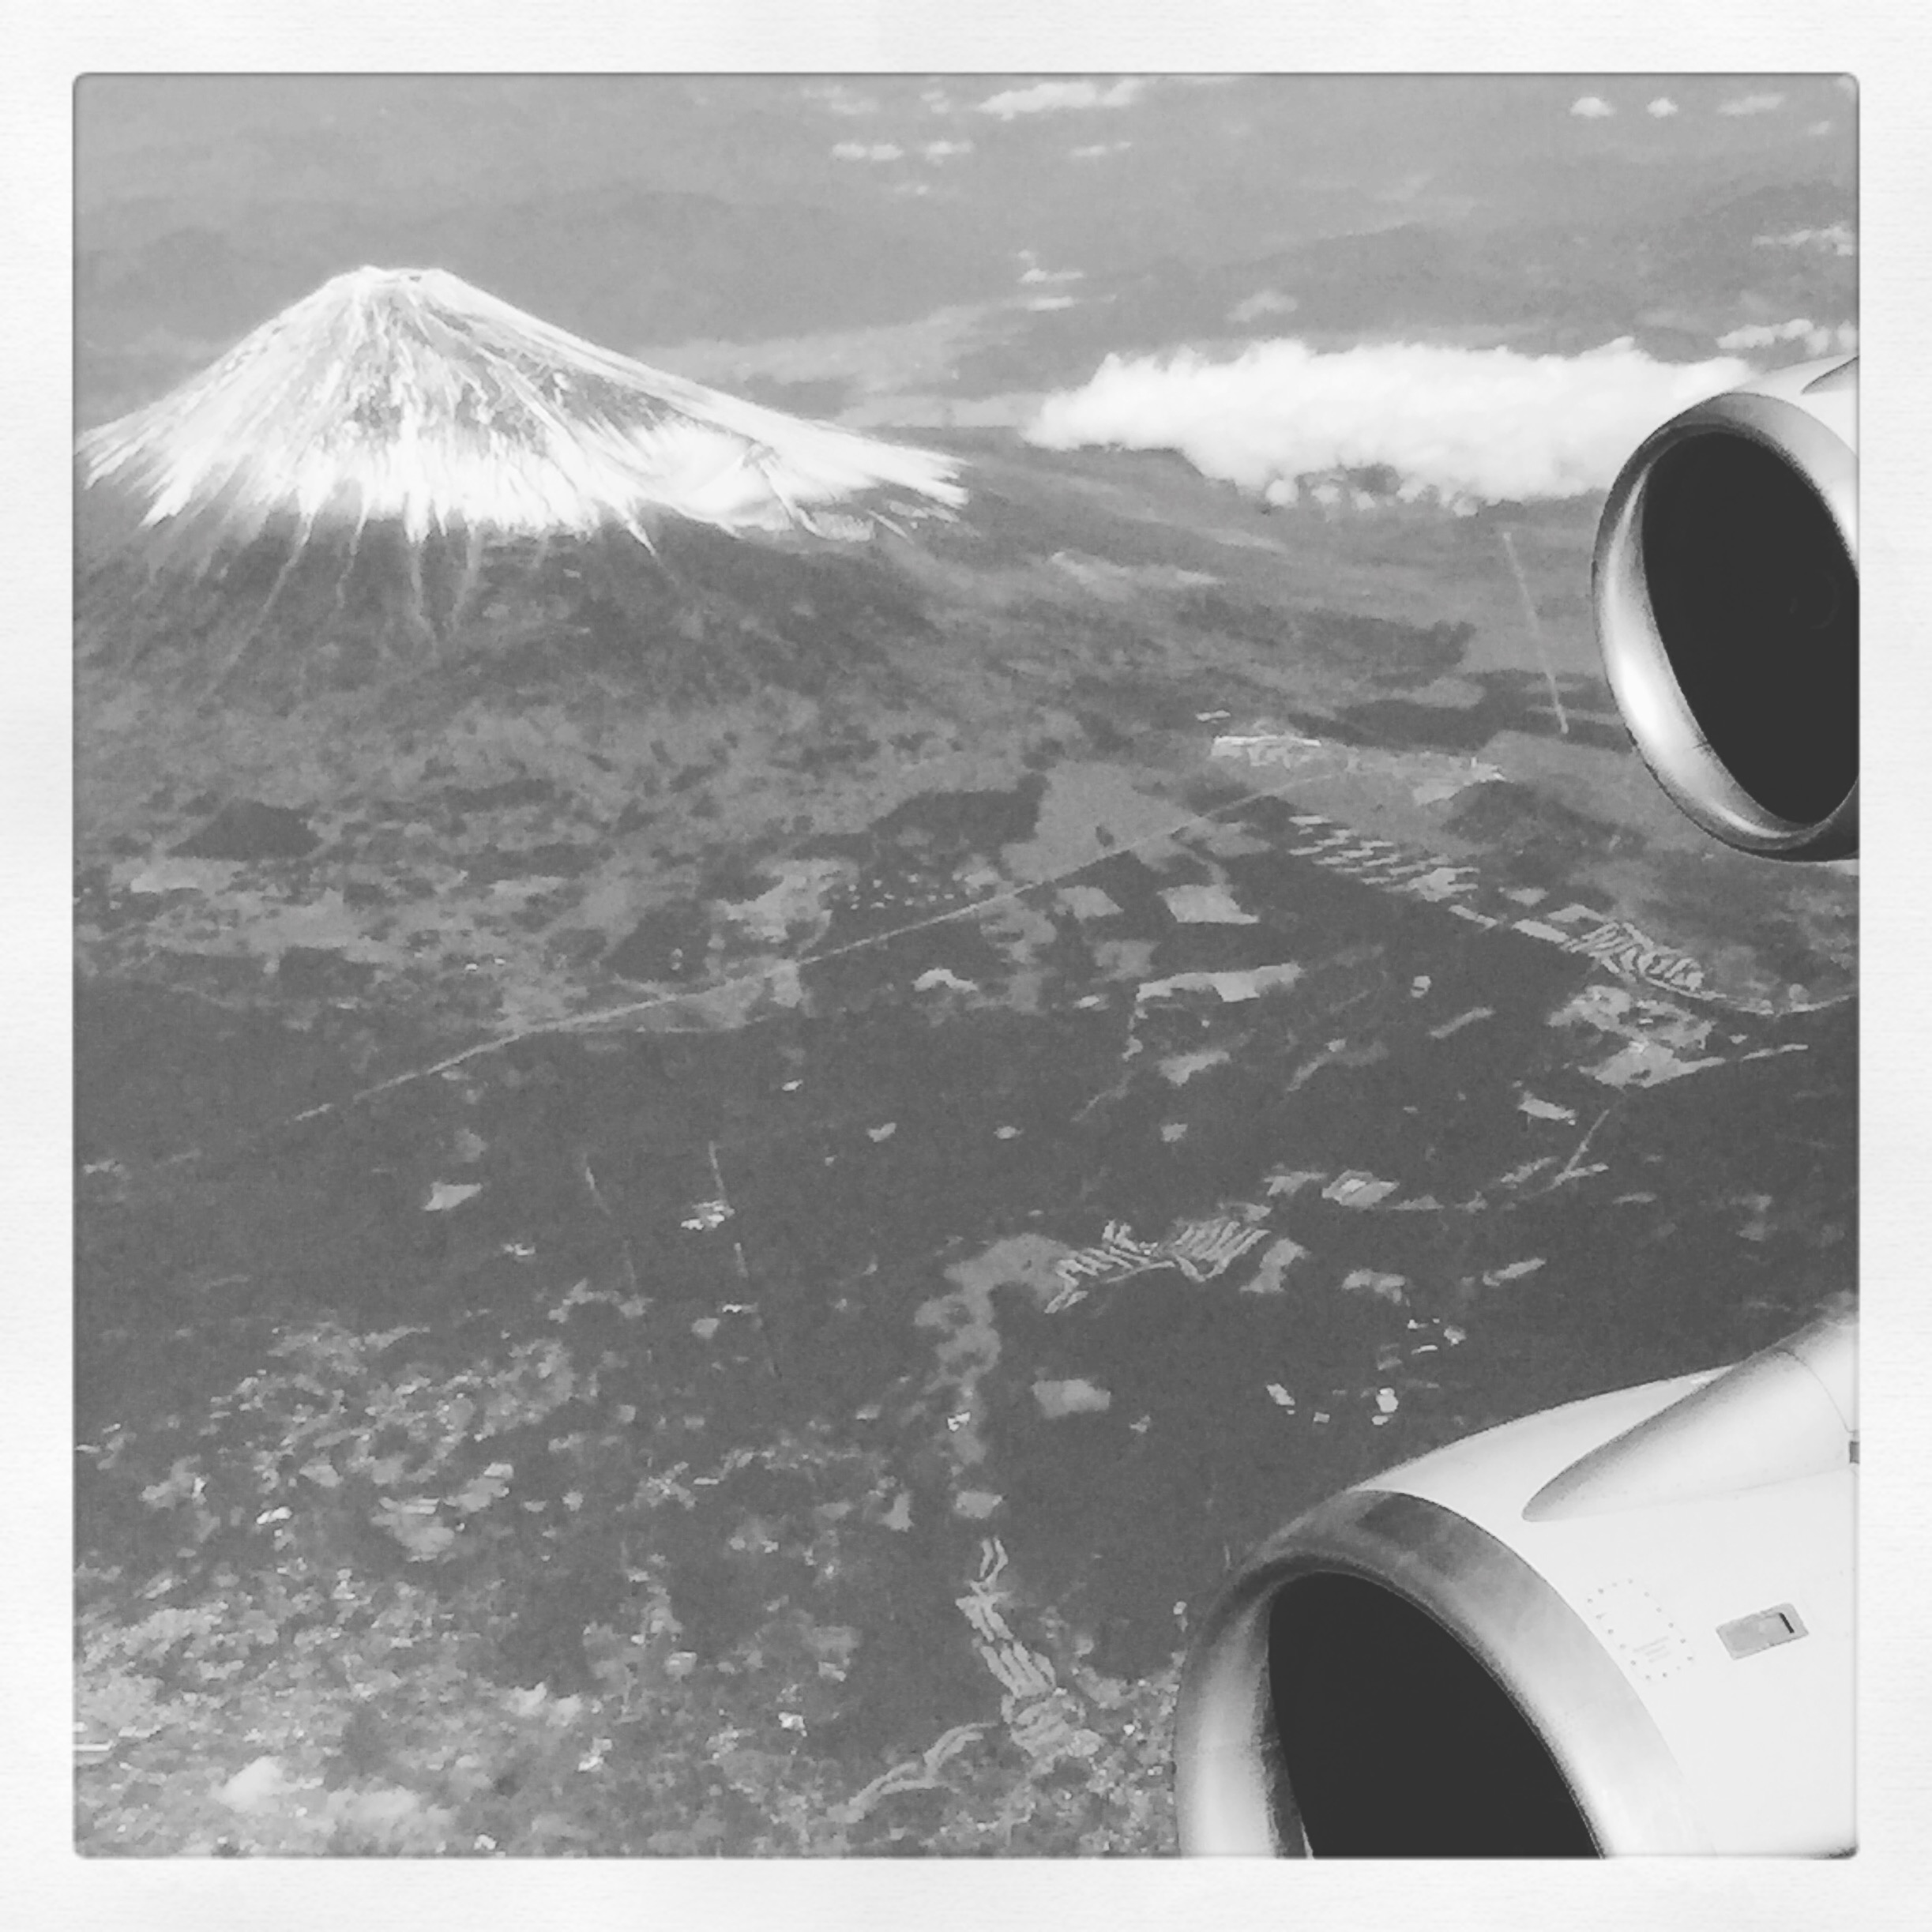 Perfect view to finish off the Tokyo trip: Mt. Fuji and Boeing 747 engines while climbing out of Tokyo-Haneda airport.